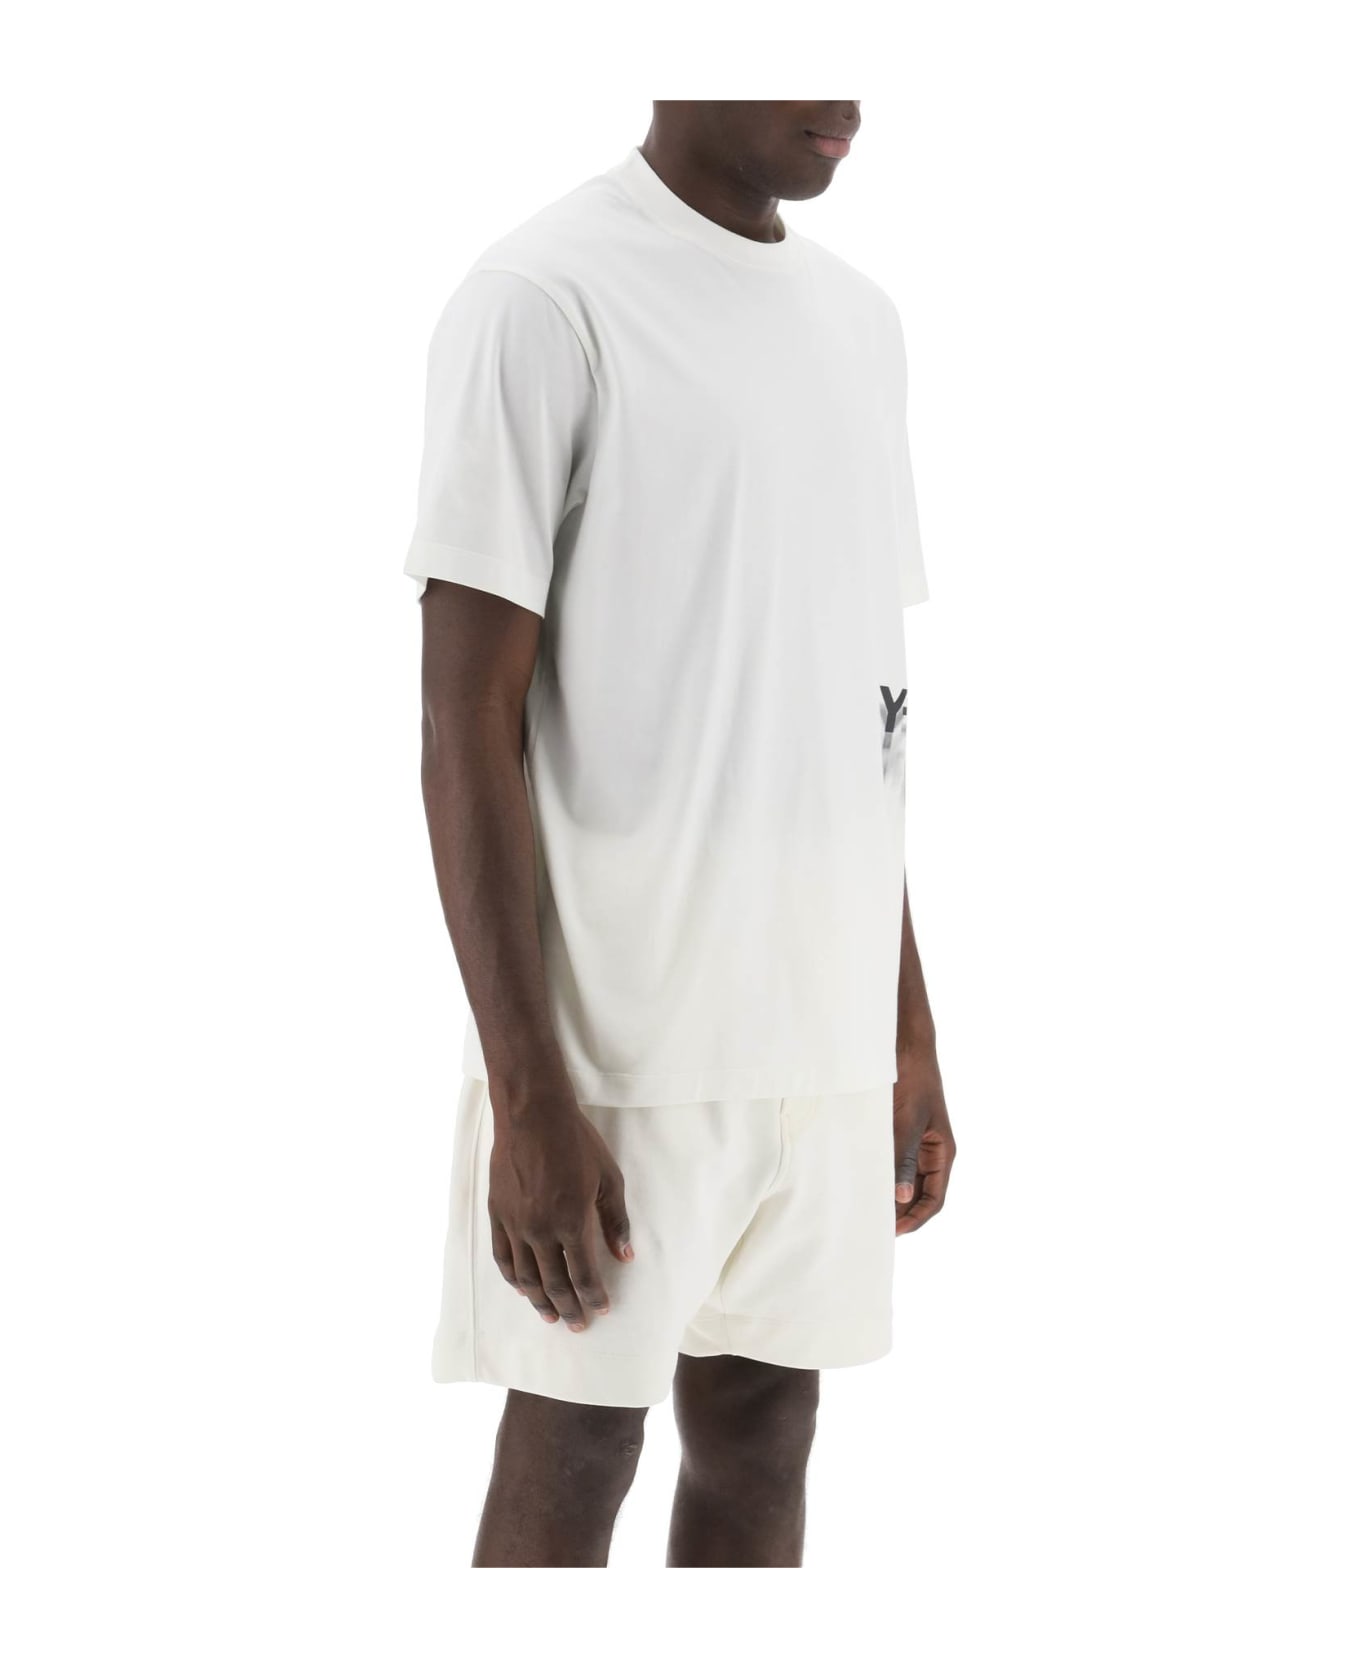 Y-3 T-shirt With Gradient Logo Print - Owhite シャツ